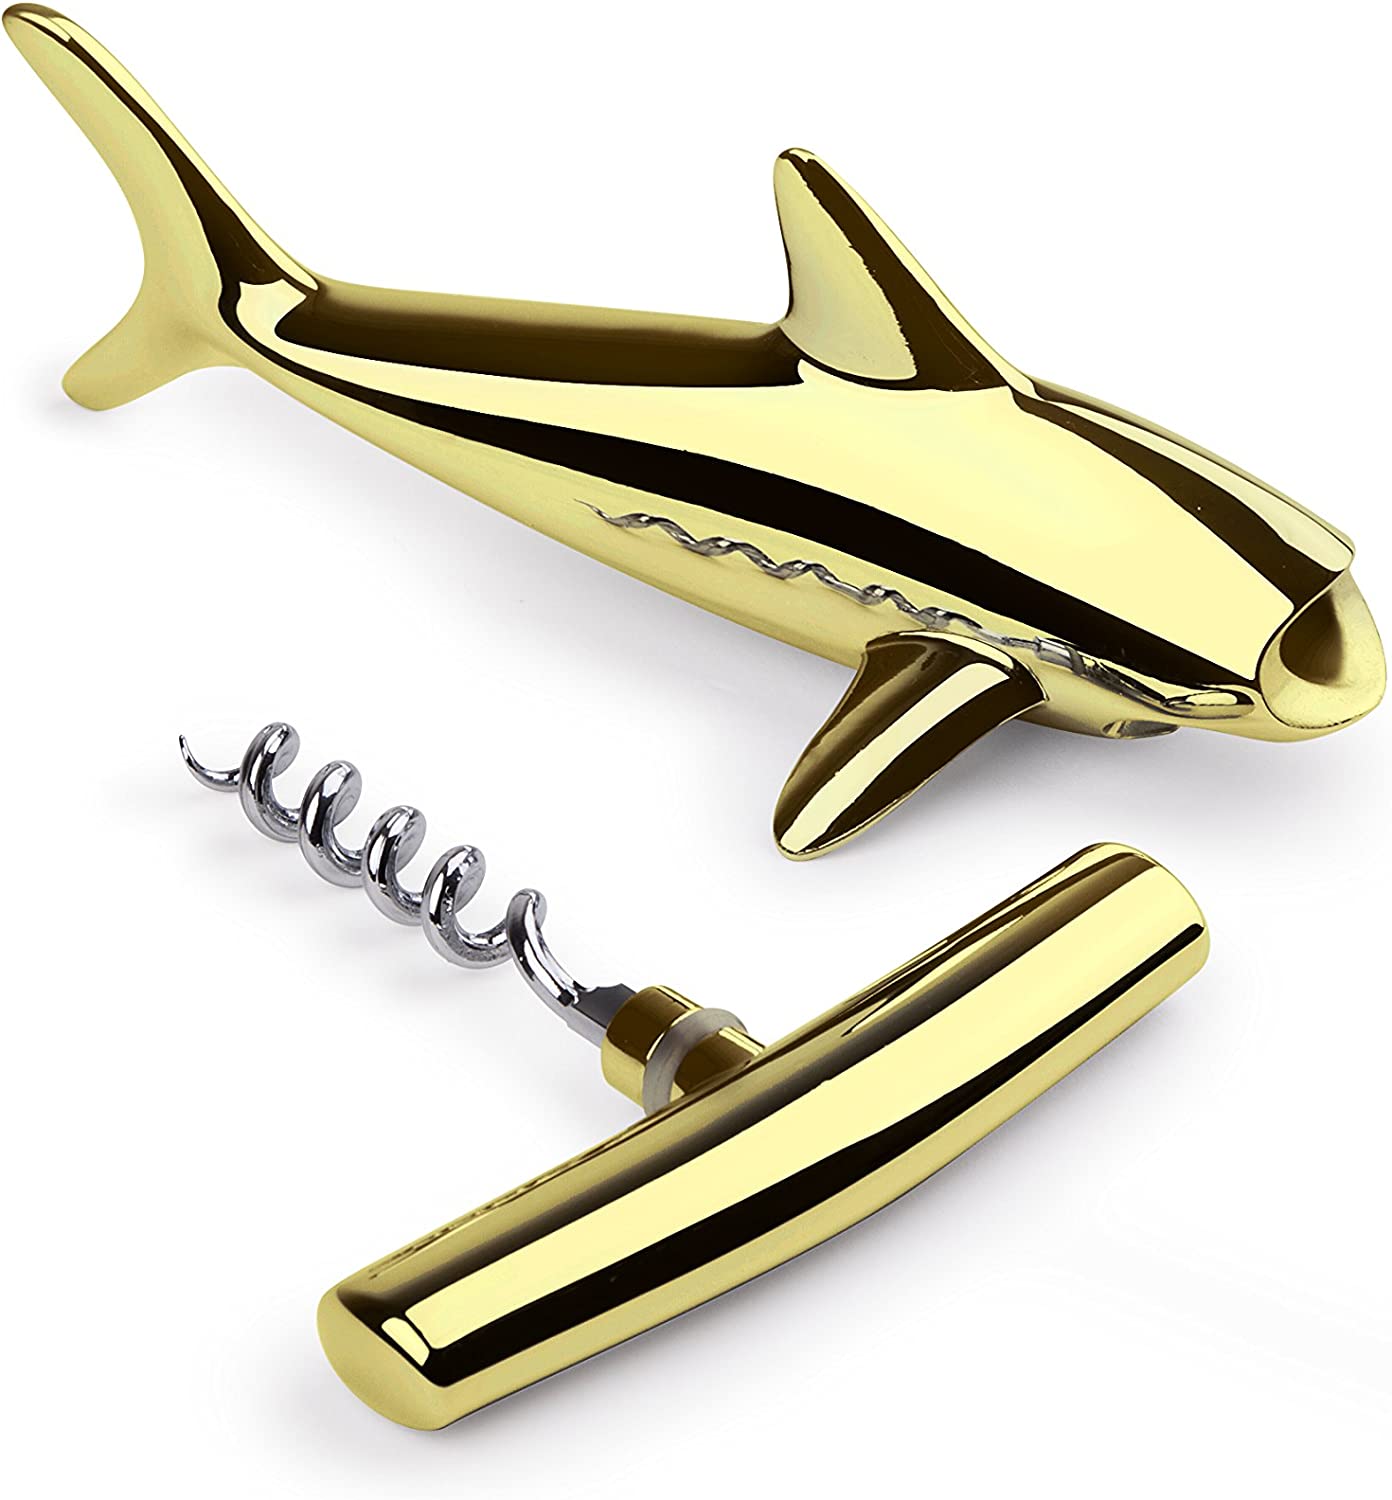 A brass bottle opener and corkscrew shaped like a hammerhead shark. The corkscrew has been removed from the sharks body.